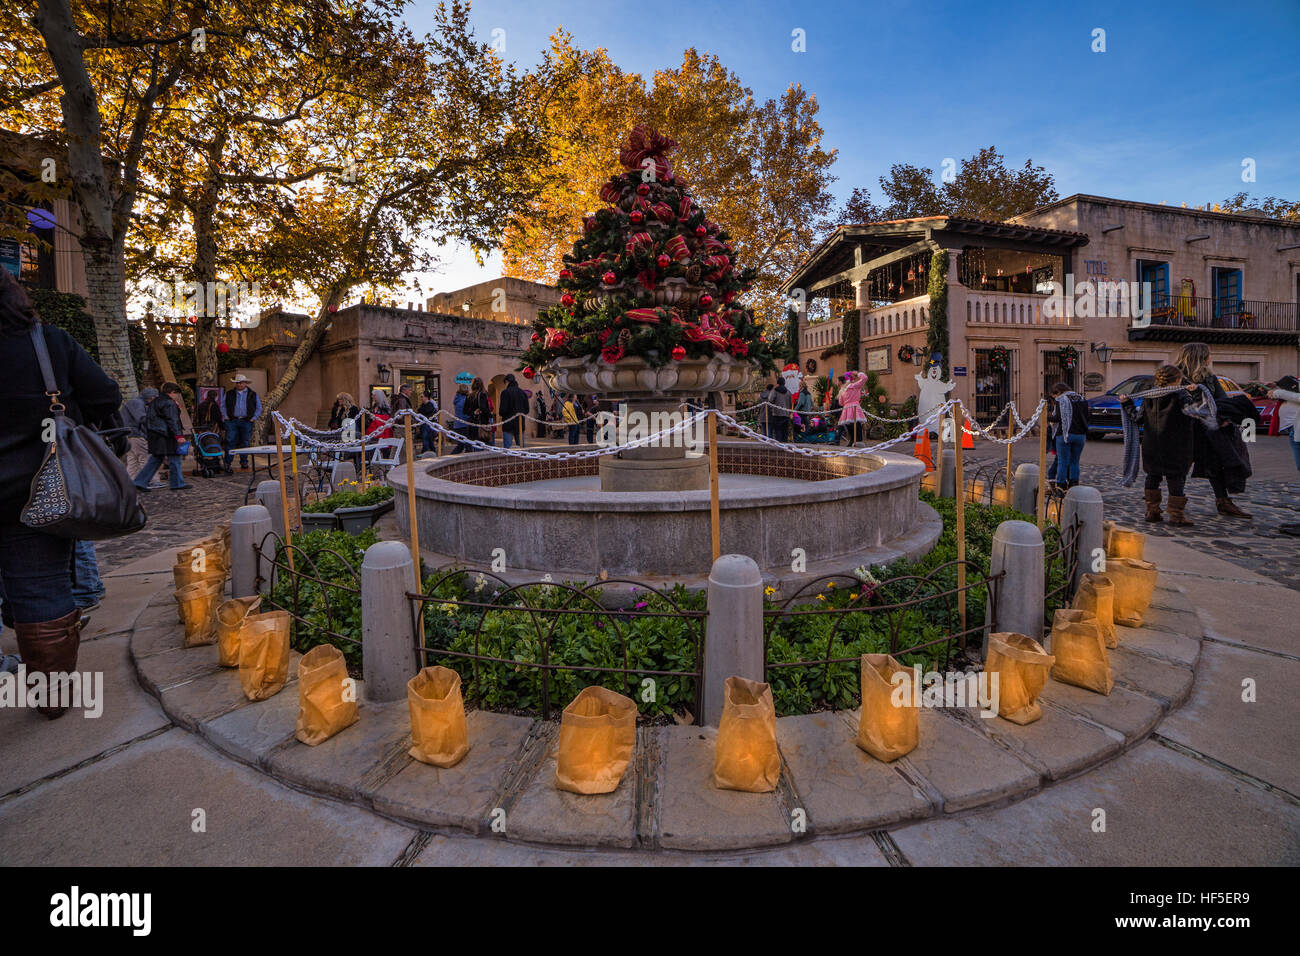 Crowds gather at Tlaquepaque for the annual Festival of Lights in Sedona, Arizona, USA Stock Photo